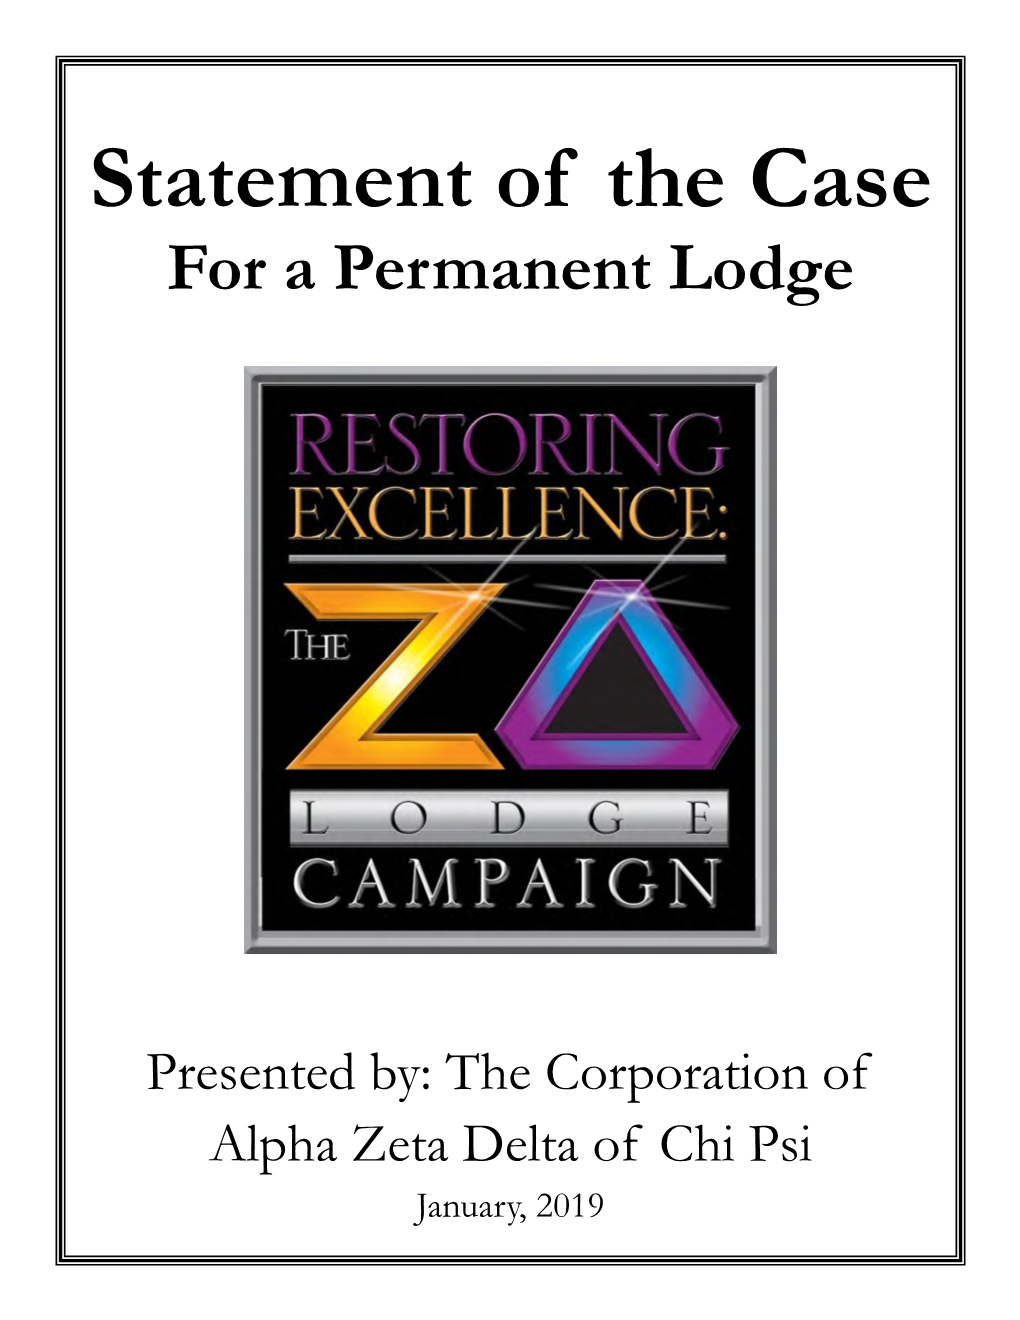 Statement of the Case for a Permanent Lodge